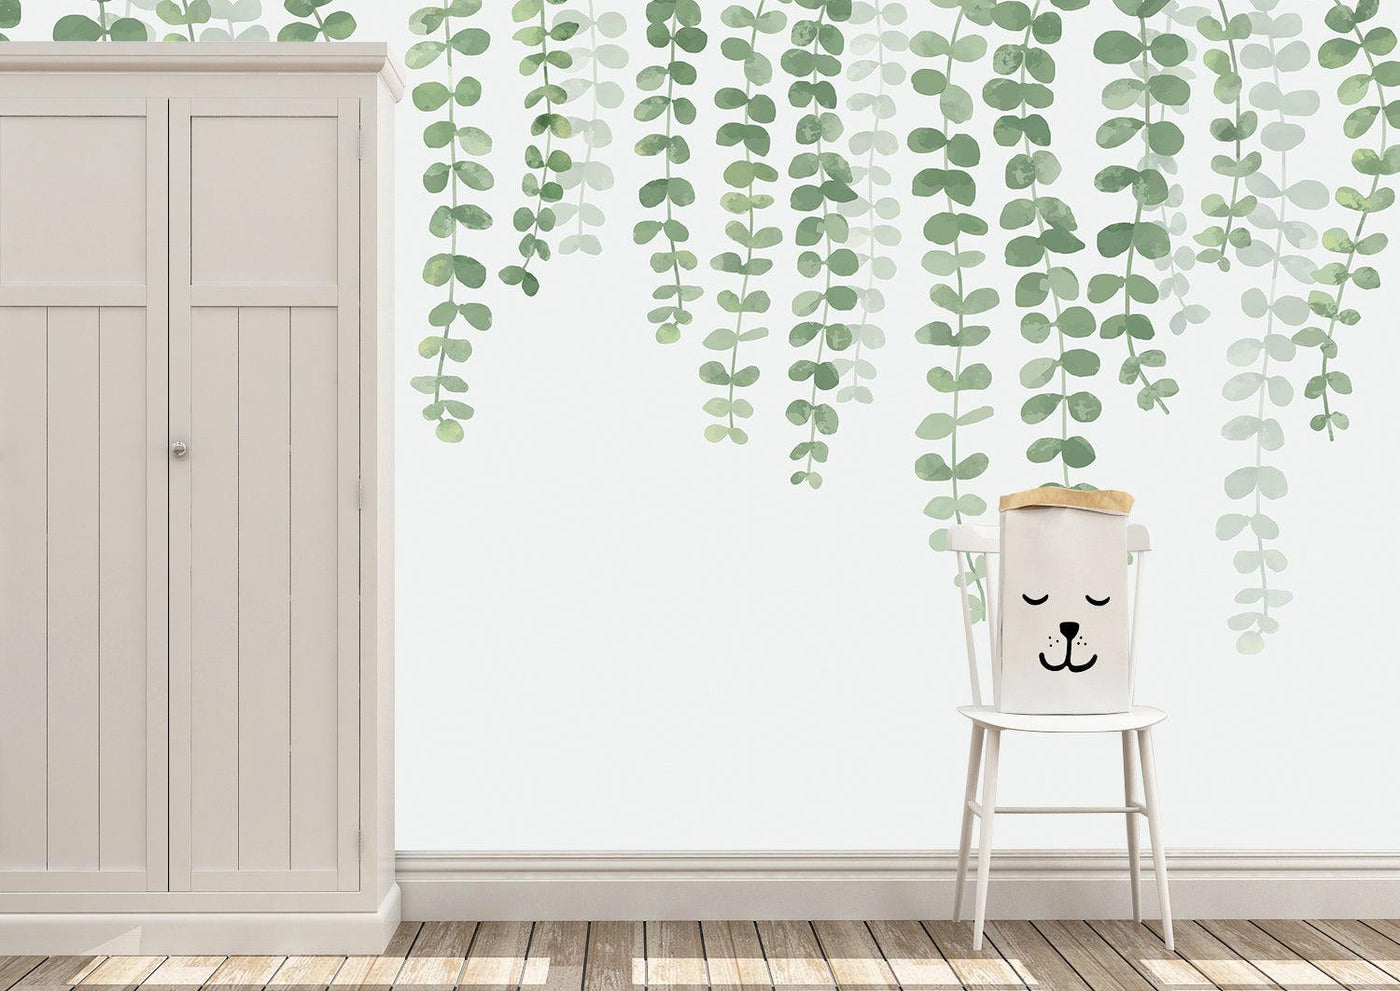 String of Pearls Mural Wallpaper (m²)-Wall Decor-FLORAL WALLPAPERS, KIDS WALLPAPERS, LEAF WALLPAPER, MURALS, MURALS / WALLPAPERS, NON-WOVEN WALLPAPER-Forest Homes-Nature inspired decor-Nature decor